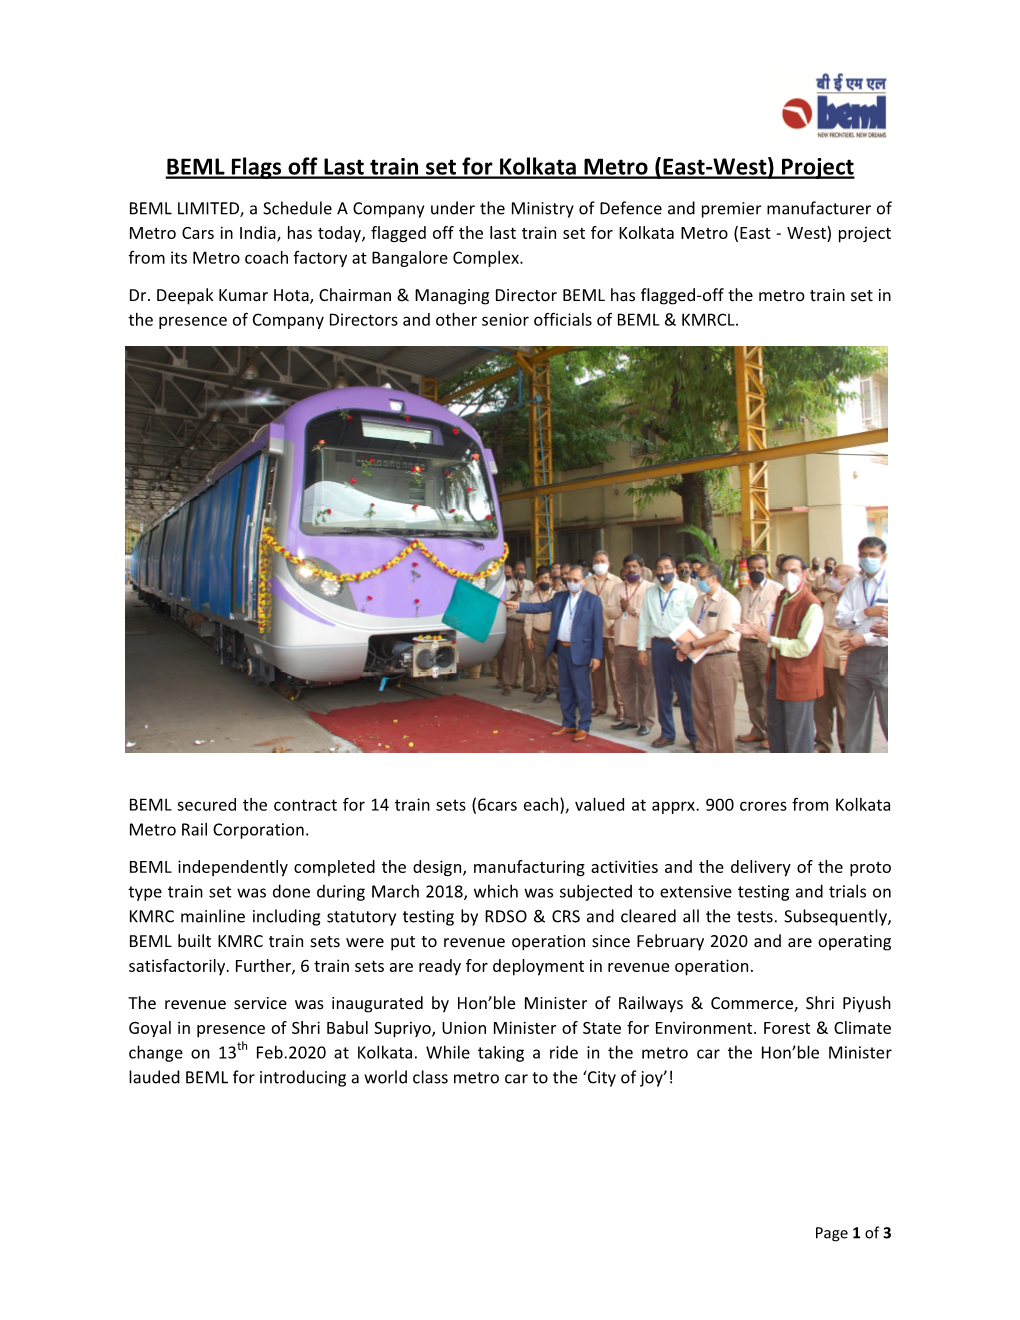 BEML Flags Off Last Train Set for Kolkata Metro (East-West) Project